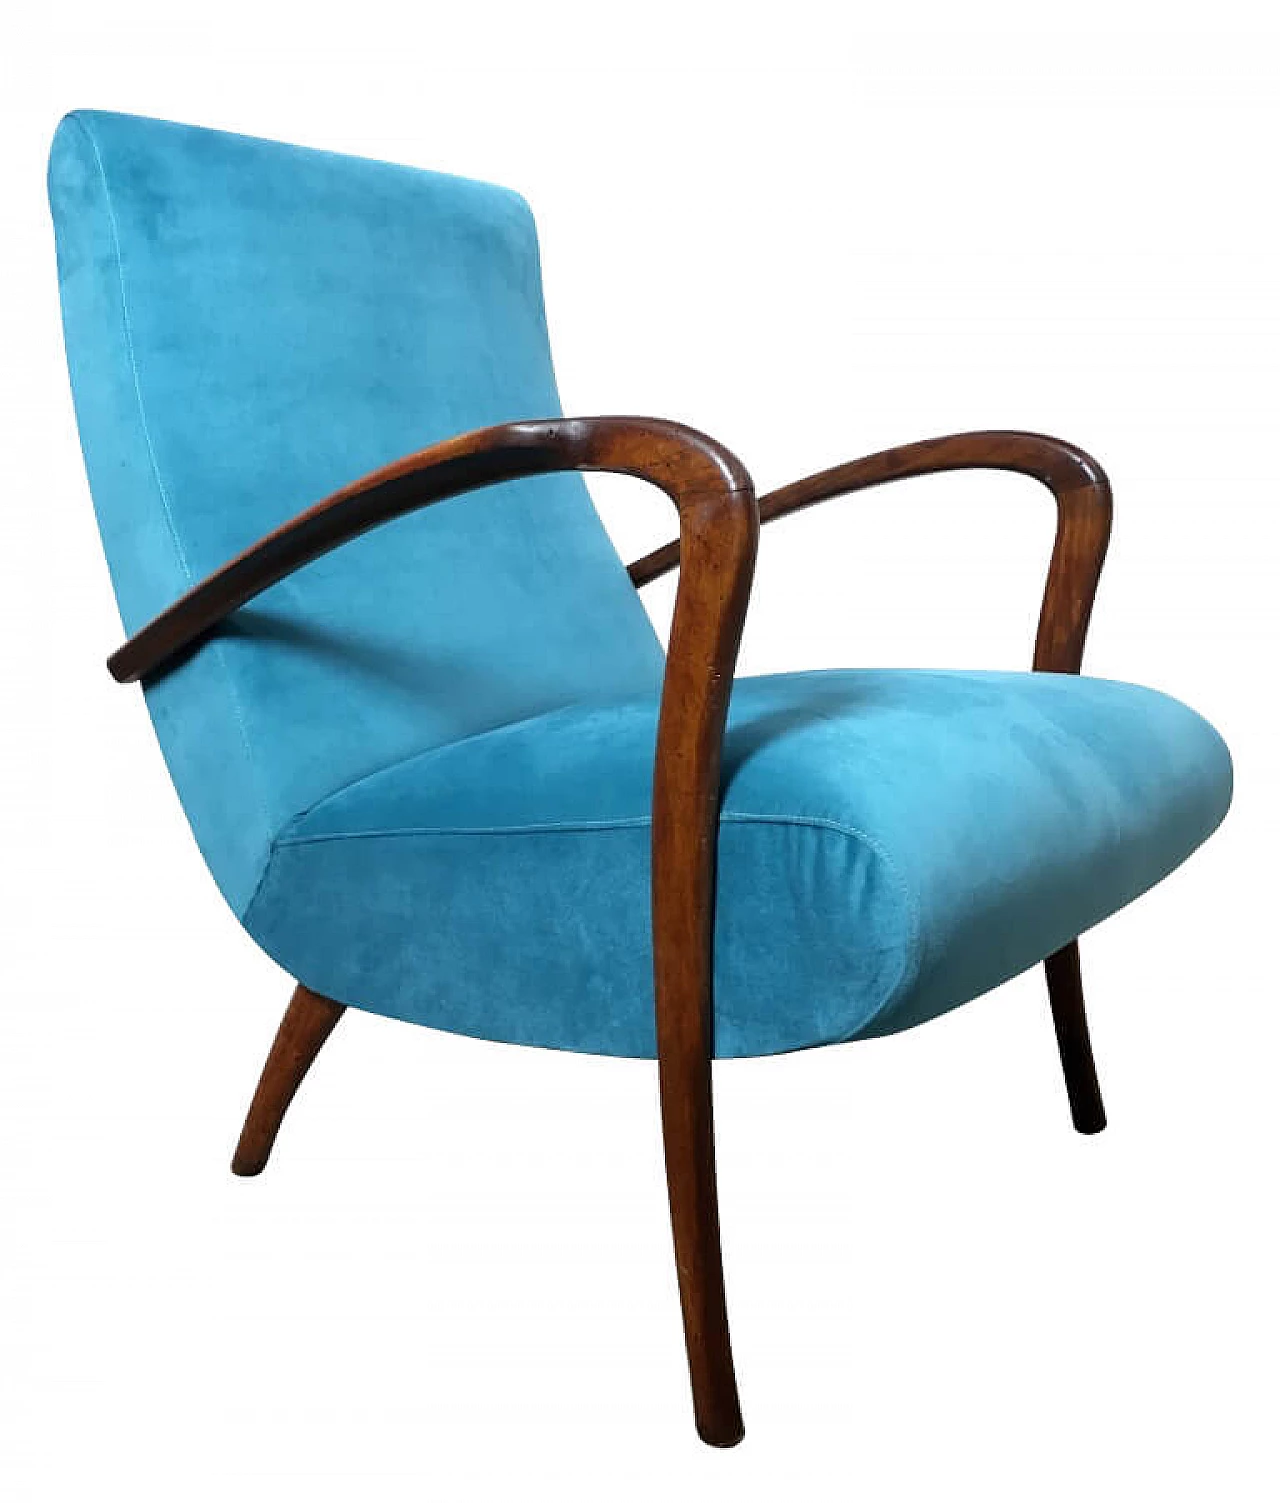 Armchair in wood and blue fabric, 1950s 1144111